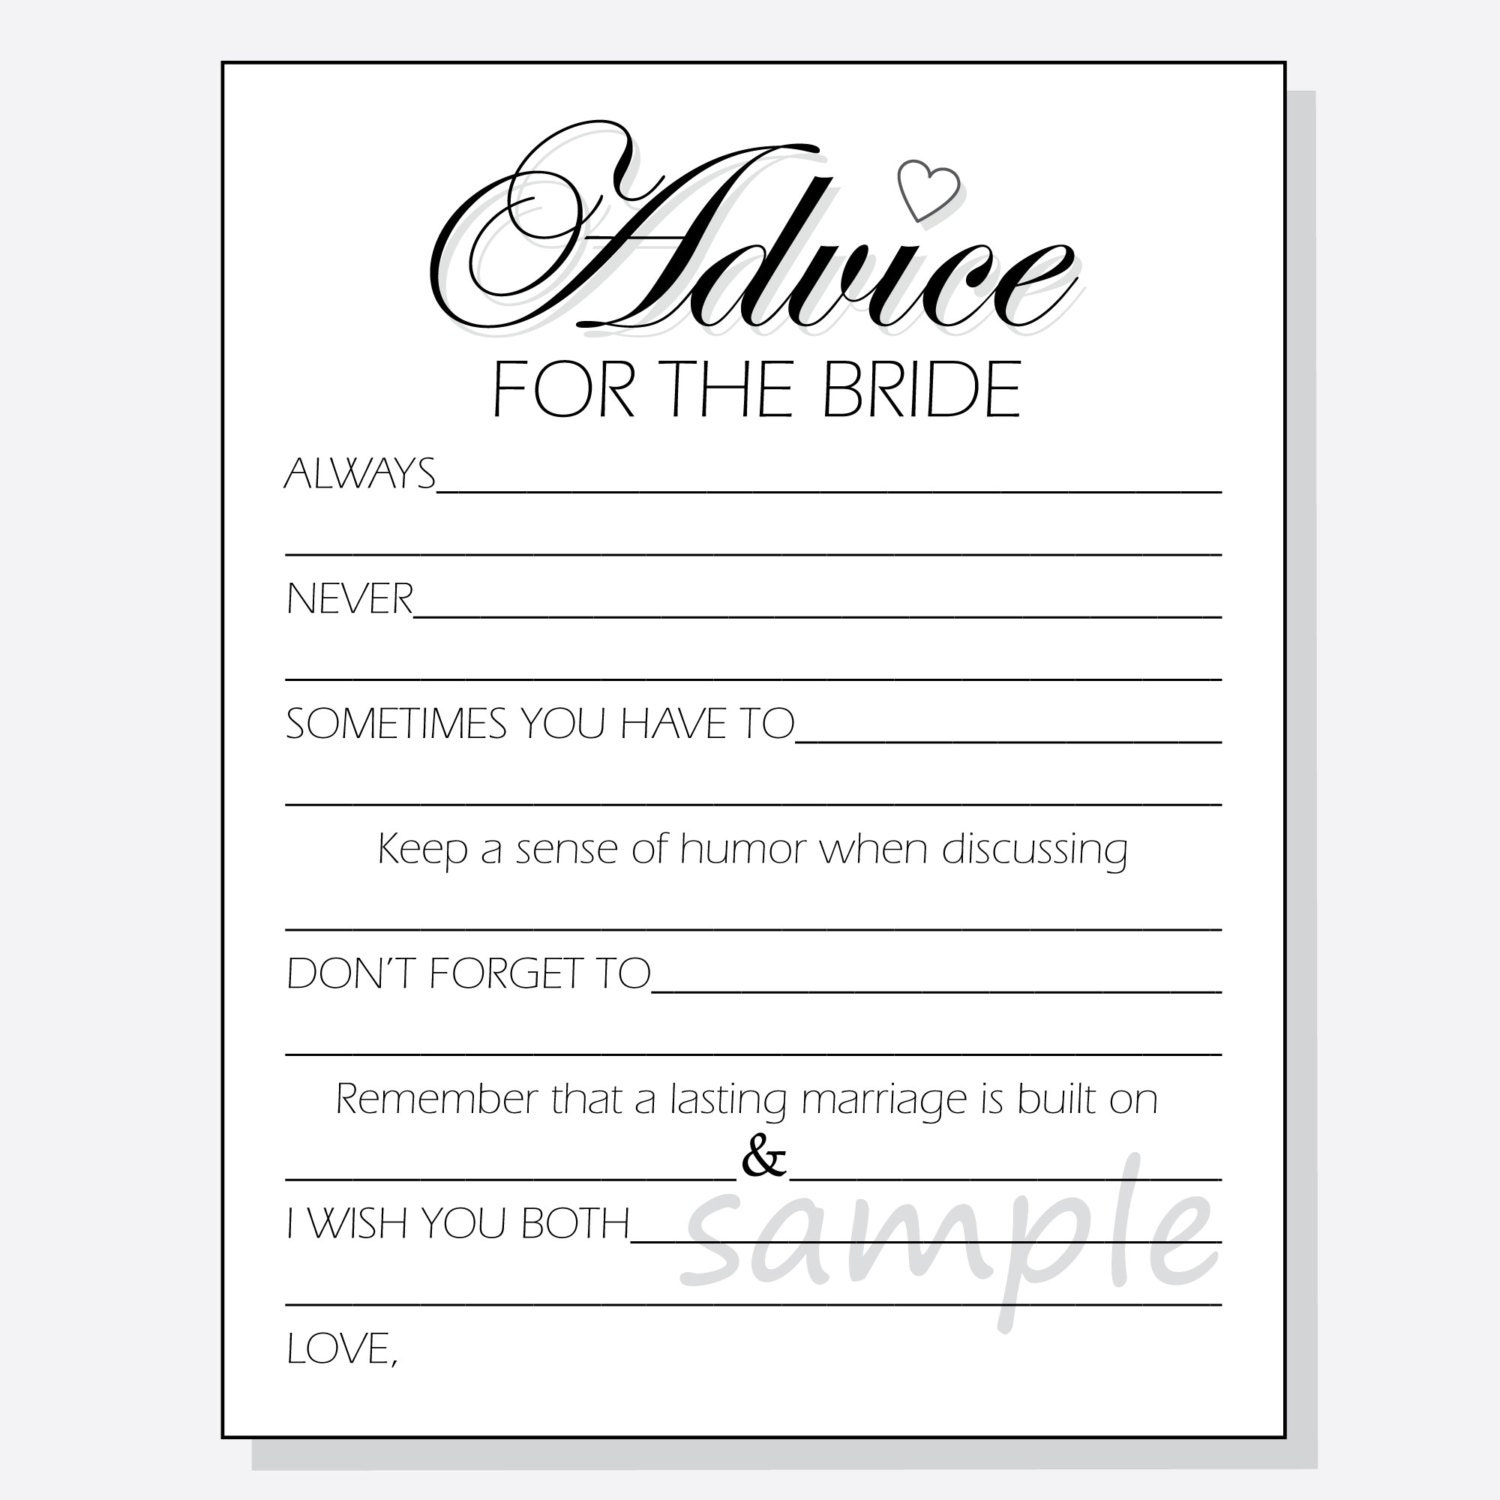 DIY Advice for the Bride Printable Cards for a Bridal Shower